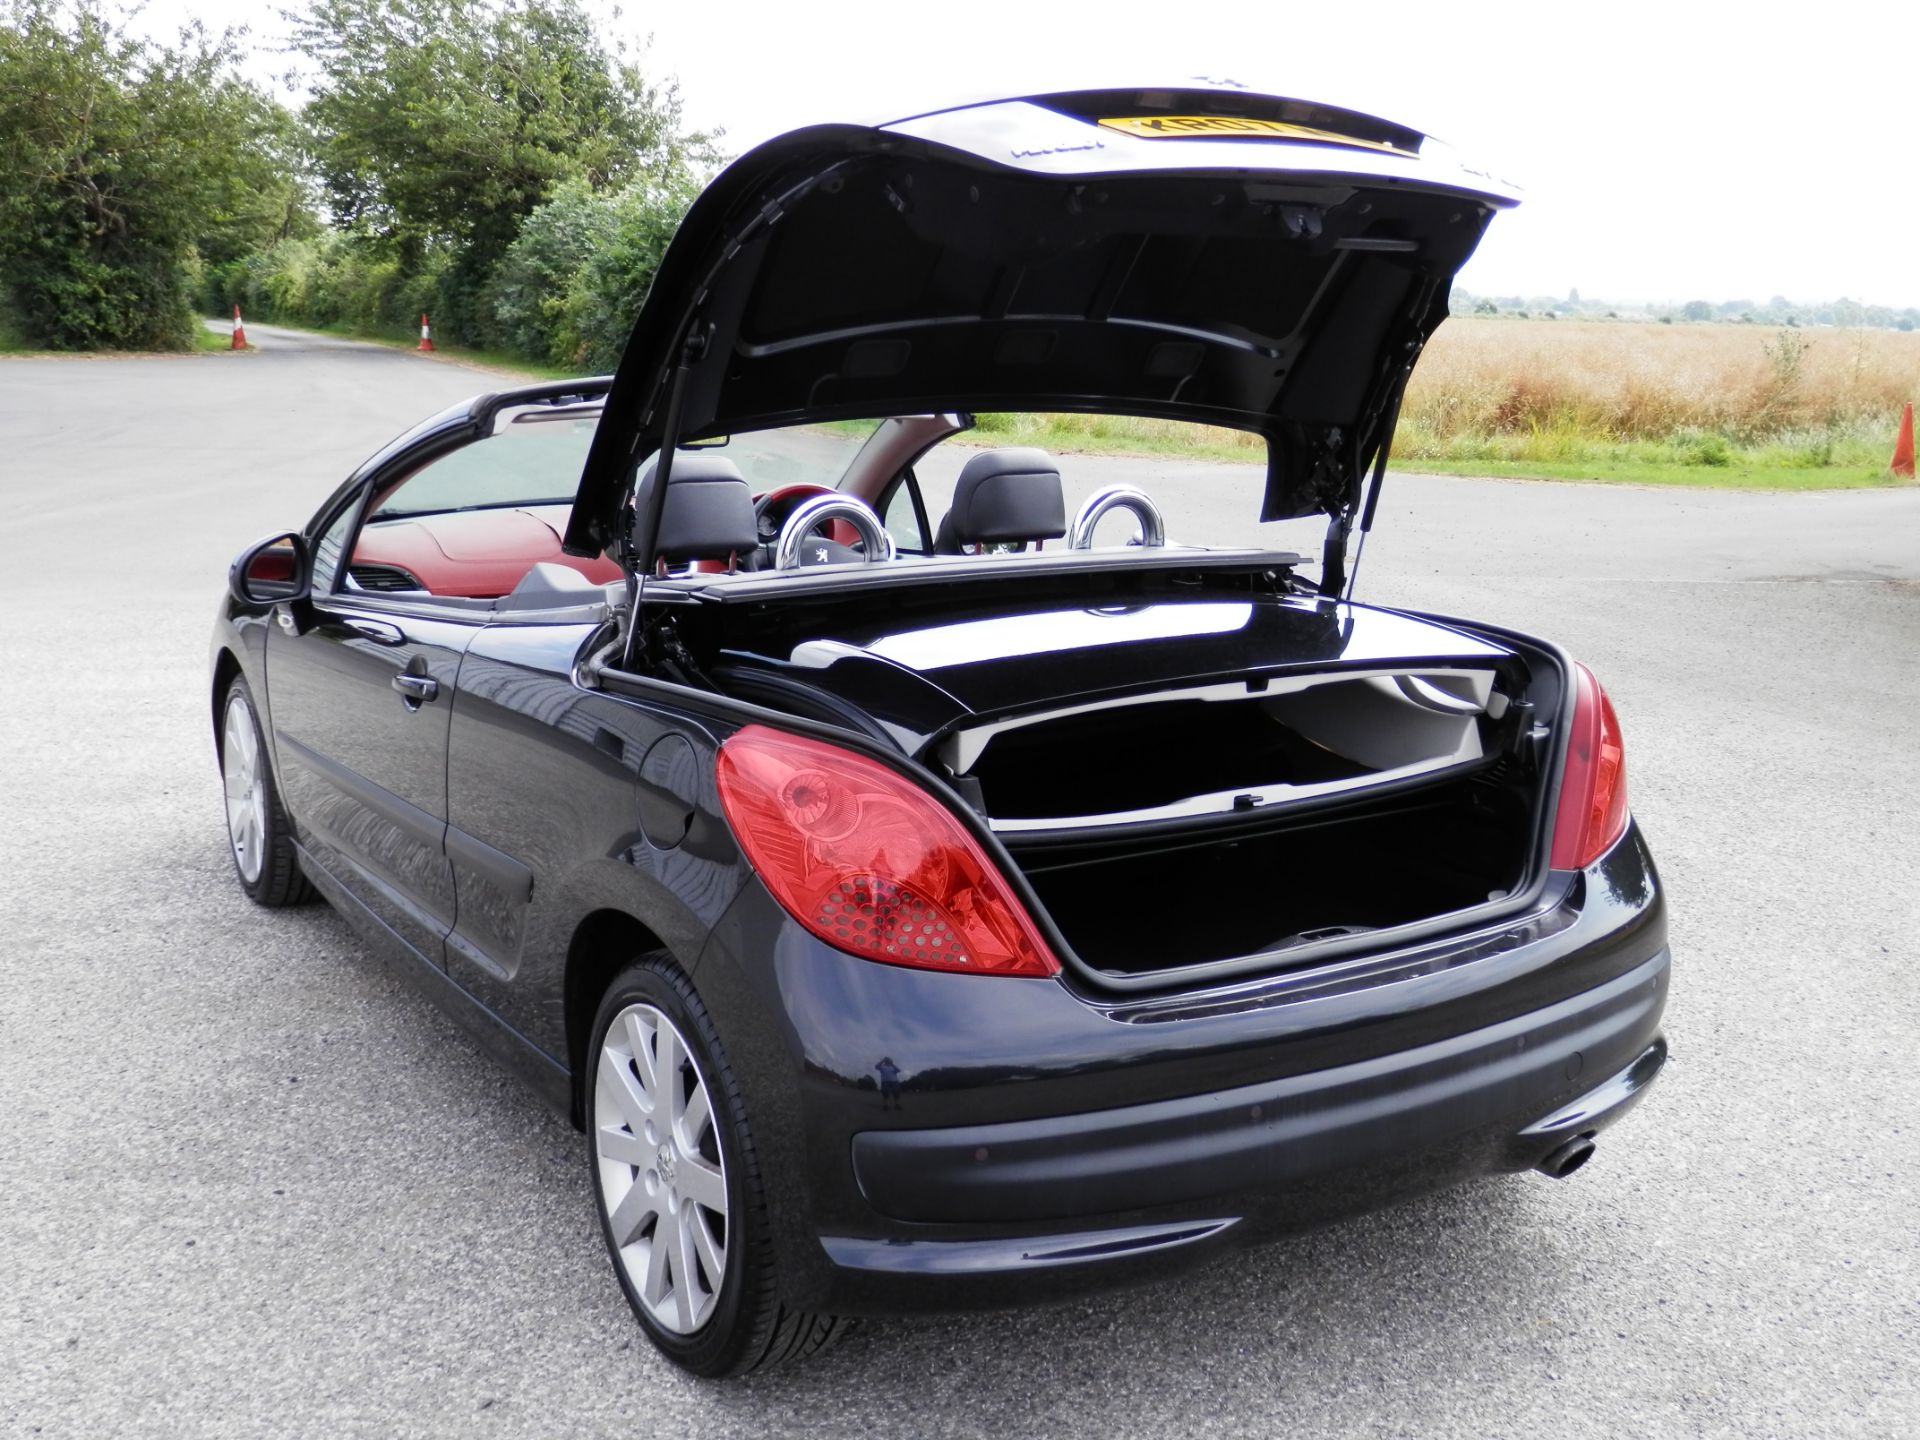 2007/07 PEUGEOT 207 COUPE CABRIOLET - 1.6 16V GT THP 2dr, WITH 2 TONE BLACK & READ LEATHER INTERIOR. - Image 11 of 31